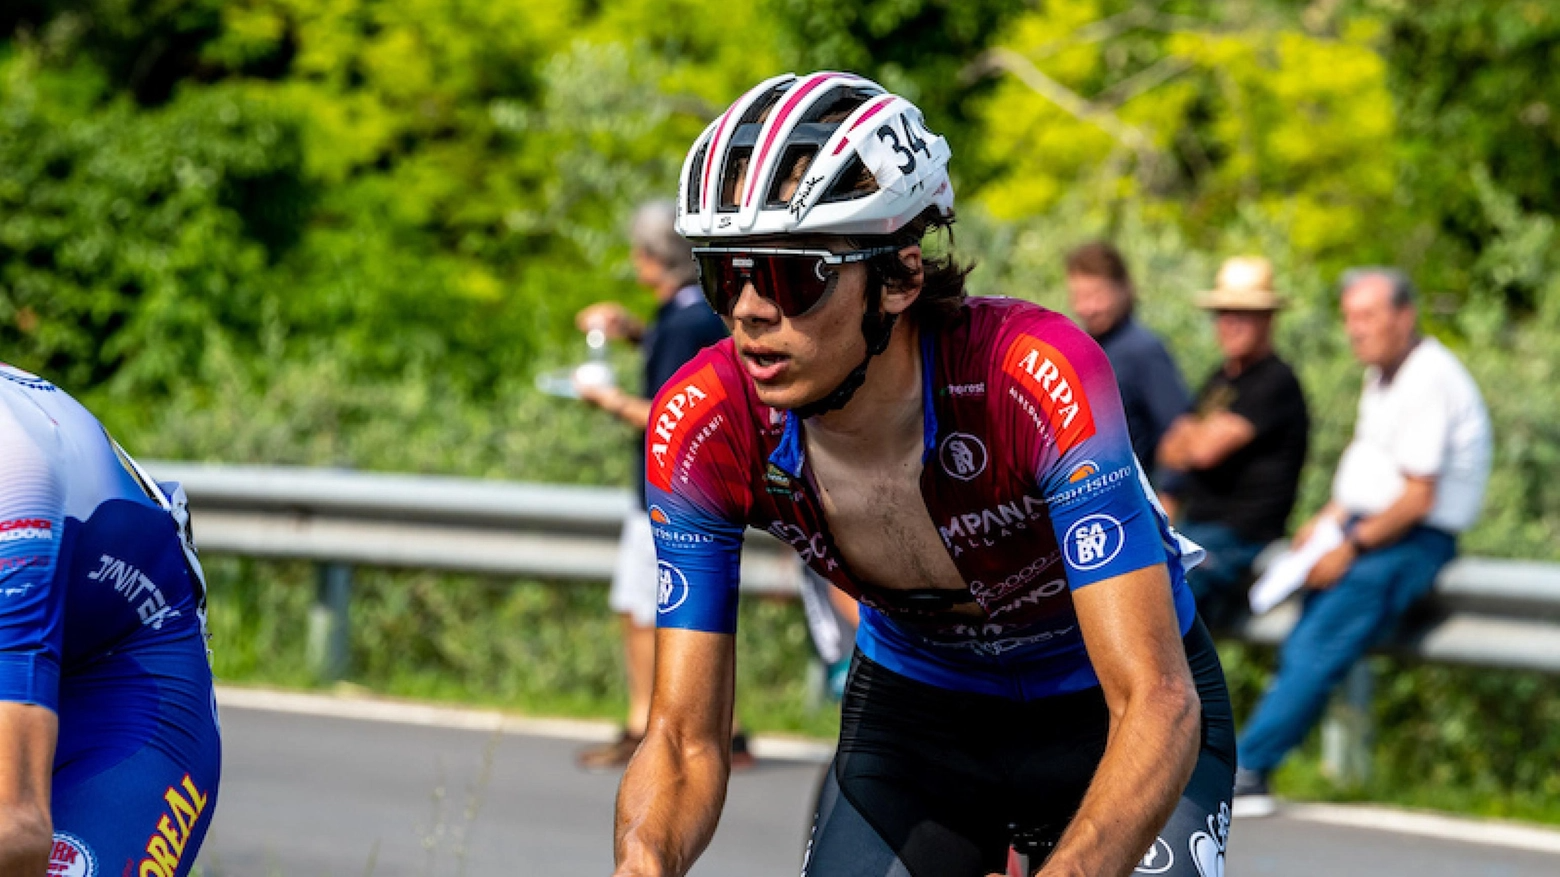 17-Year-Old Italian Cyclist Dies During Race in Austria